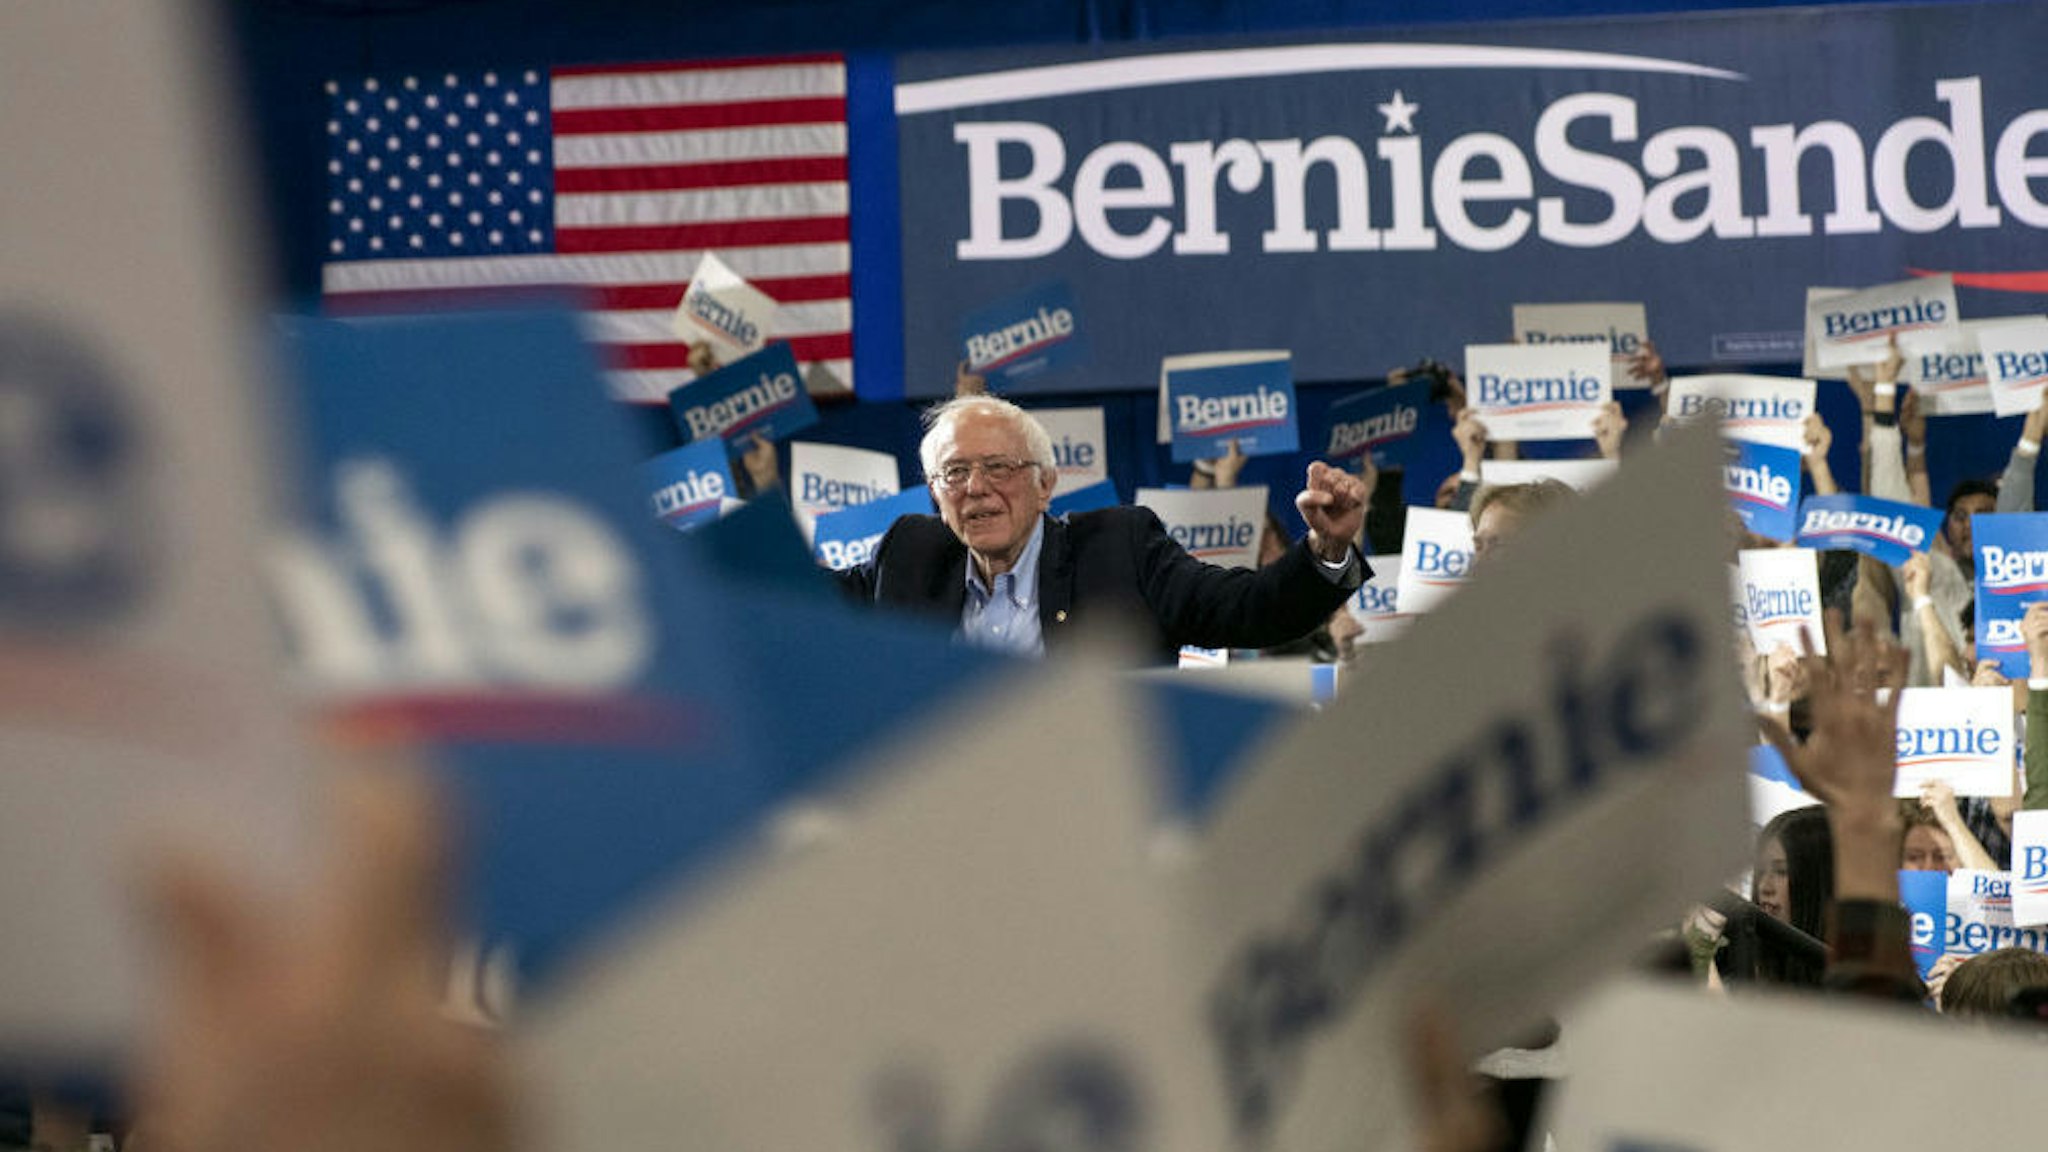 Senator Bernie Sanders, an Independent from Vermont and 2020 presidential candidate, speaks during a primary night rally in Essex Junction, Vermont, U.S., on Tuesday, March 3, 2020. The biggest day of the presidential primary calendar will define the nomination fight for Sanders and Joe Biden and determine whether Michael Bloomberg and Elizabeth Warren have a rationale for carrying on their campaigns. Photographer: Kate Flock/Bloomberg